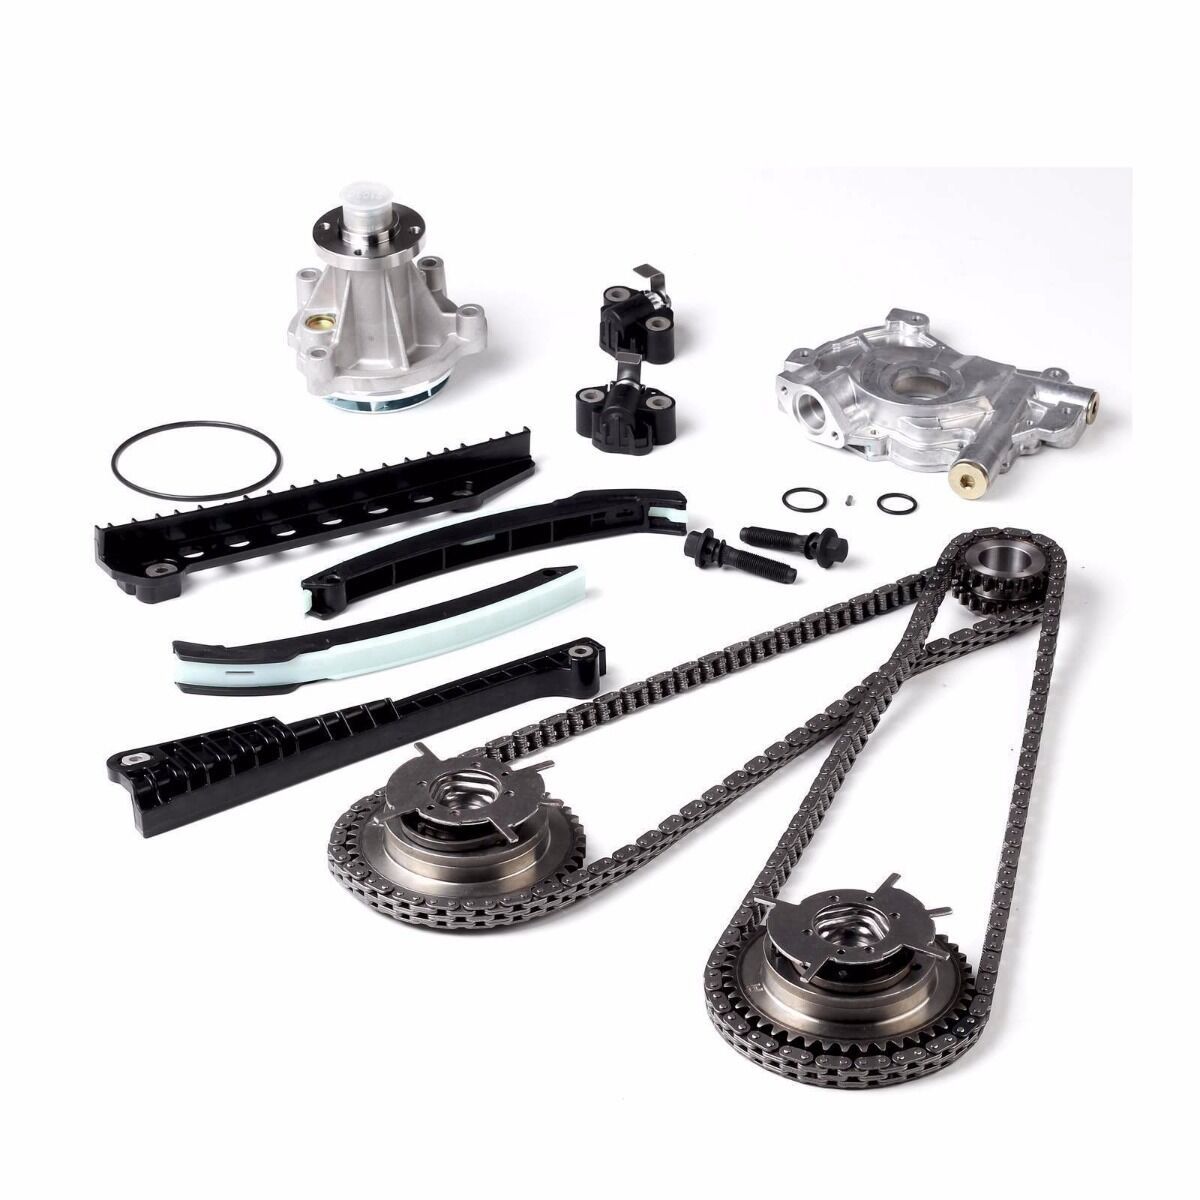 Blackhorse-racing - Timing chain kit oil&water pump+cam phasers for ford f150 lincoln 5.4l 2004-2008